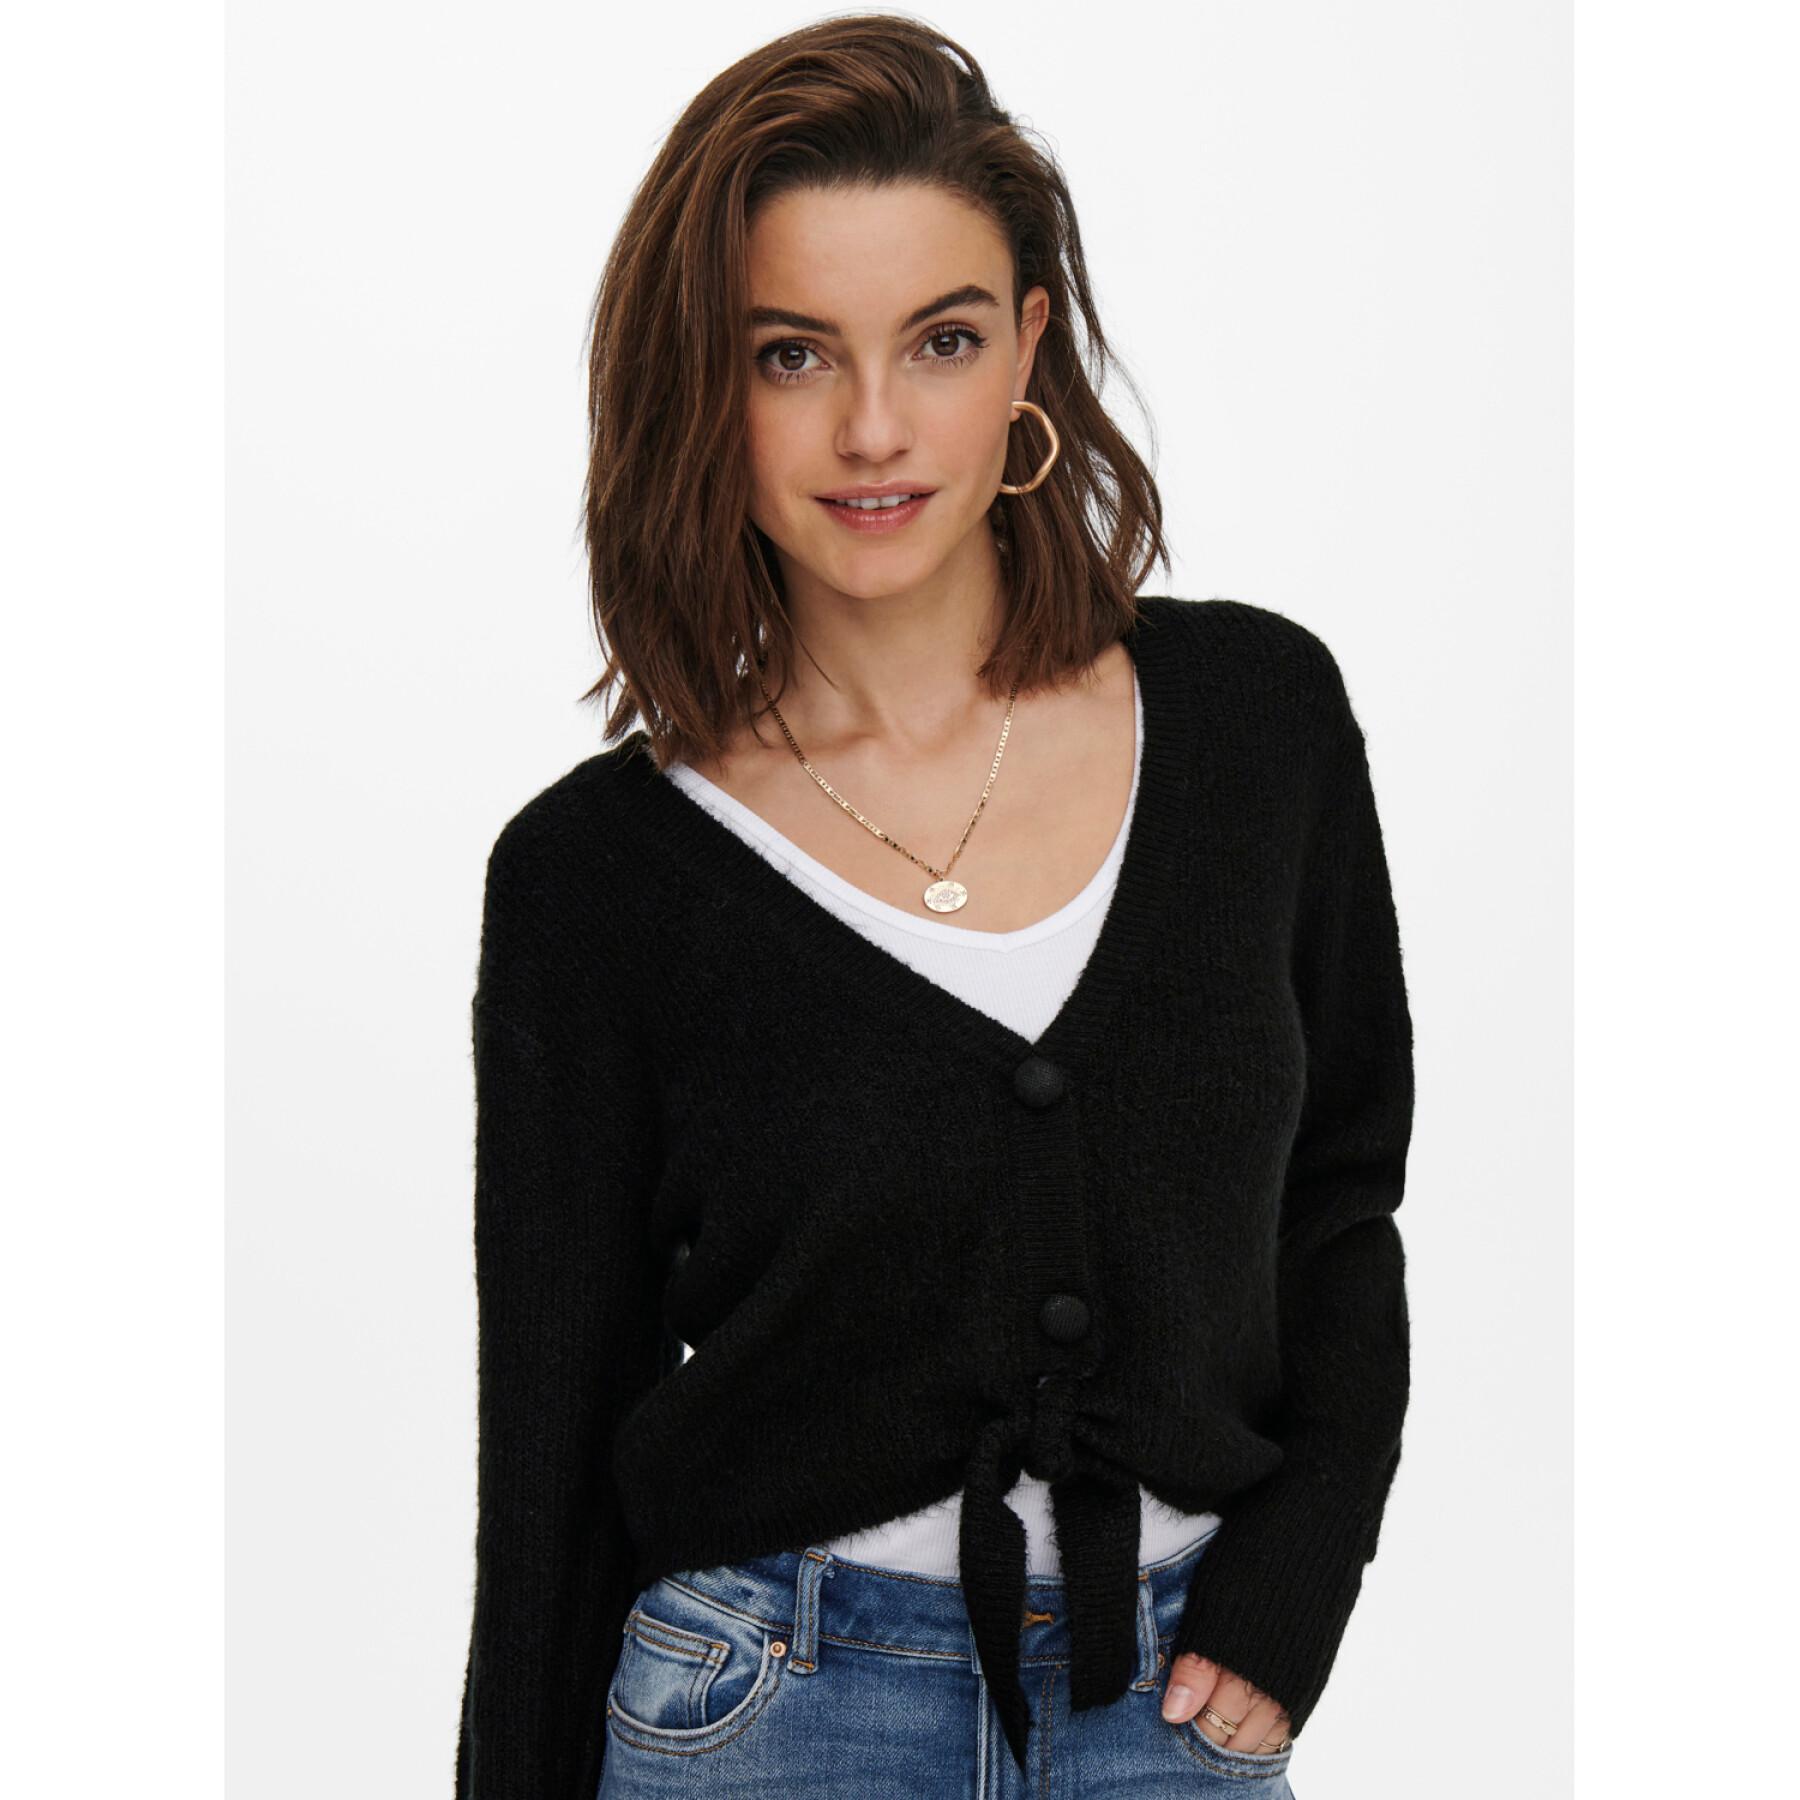 Cardigan femme Only Monica